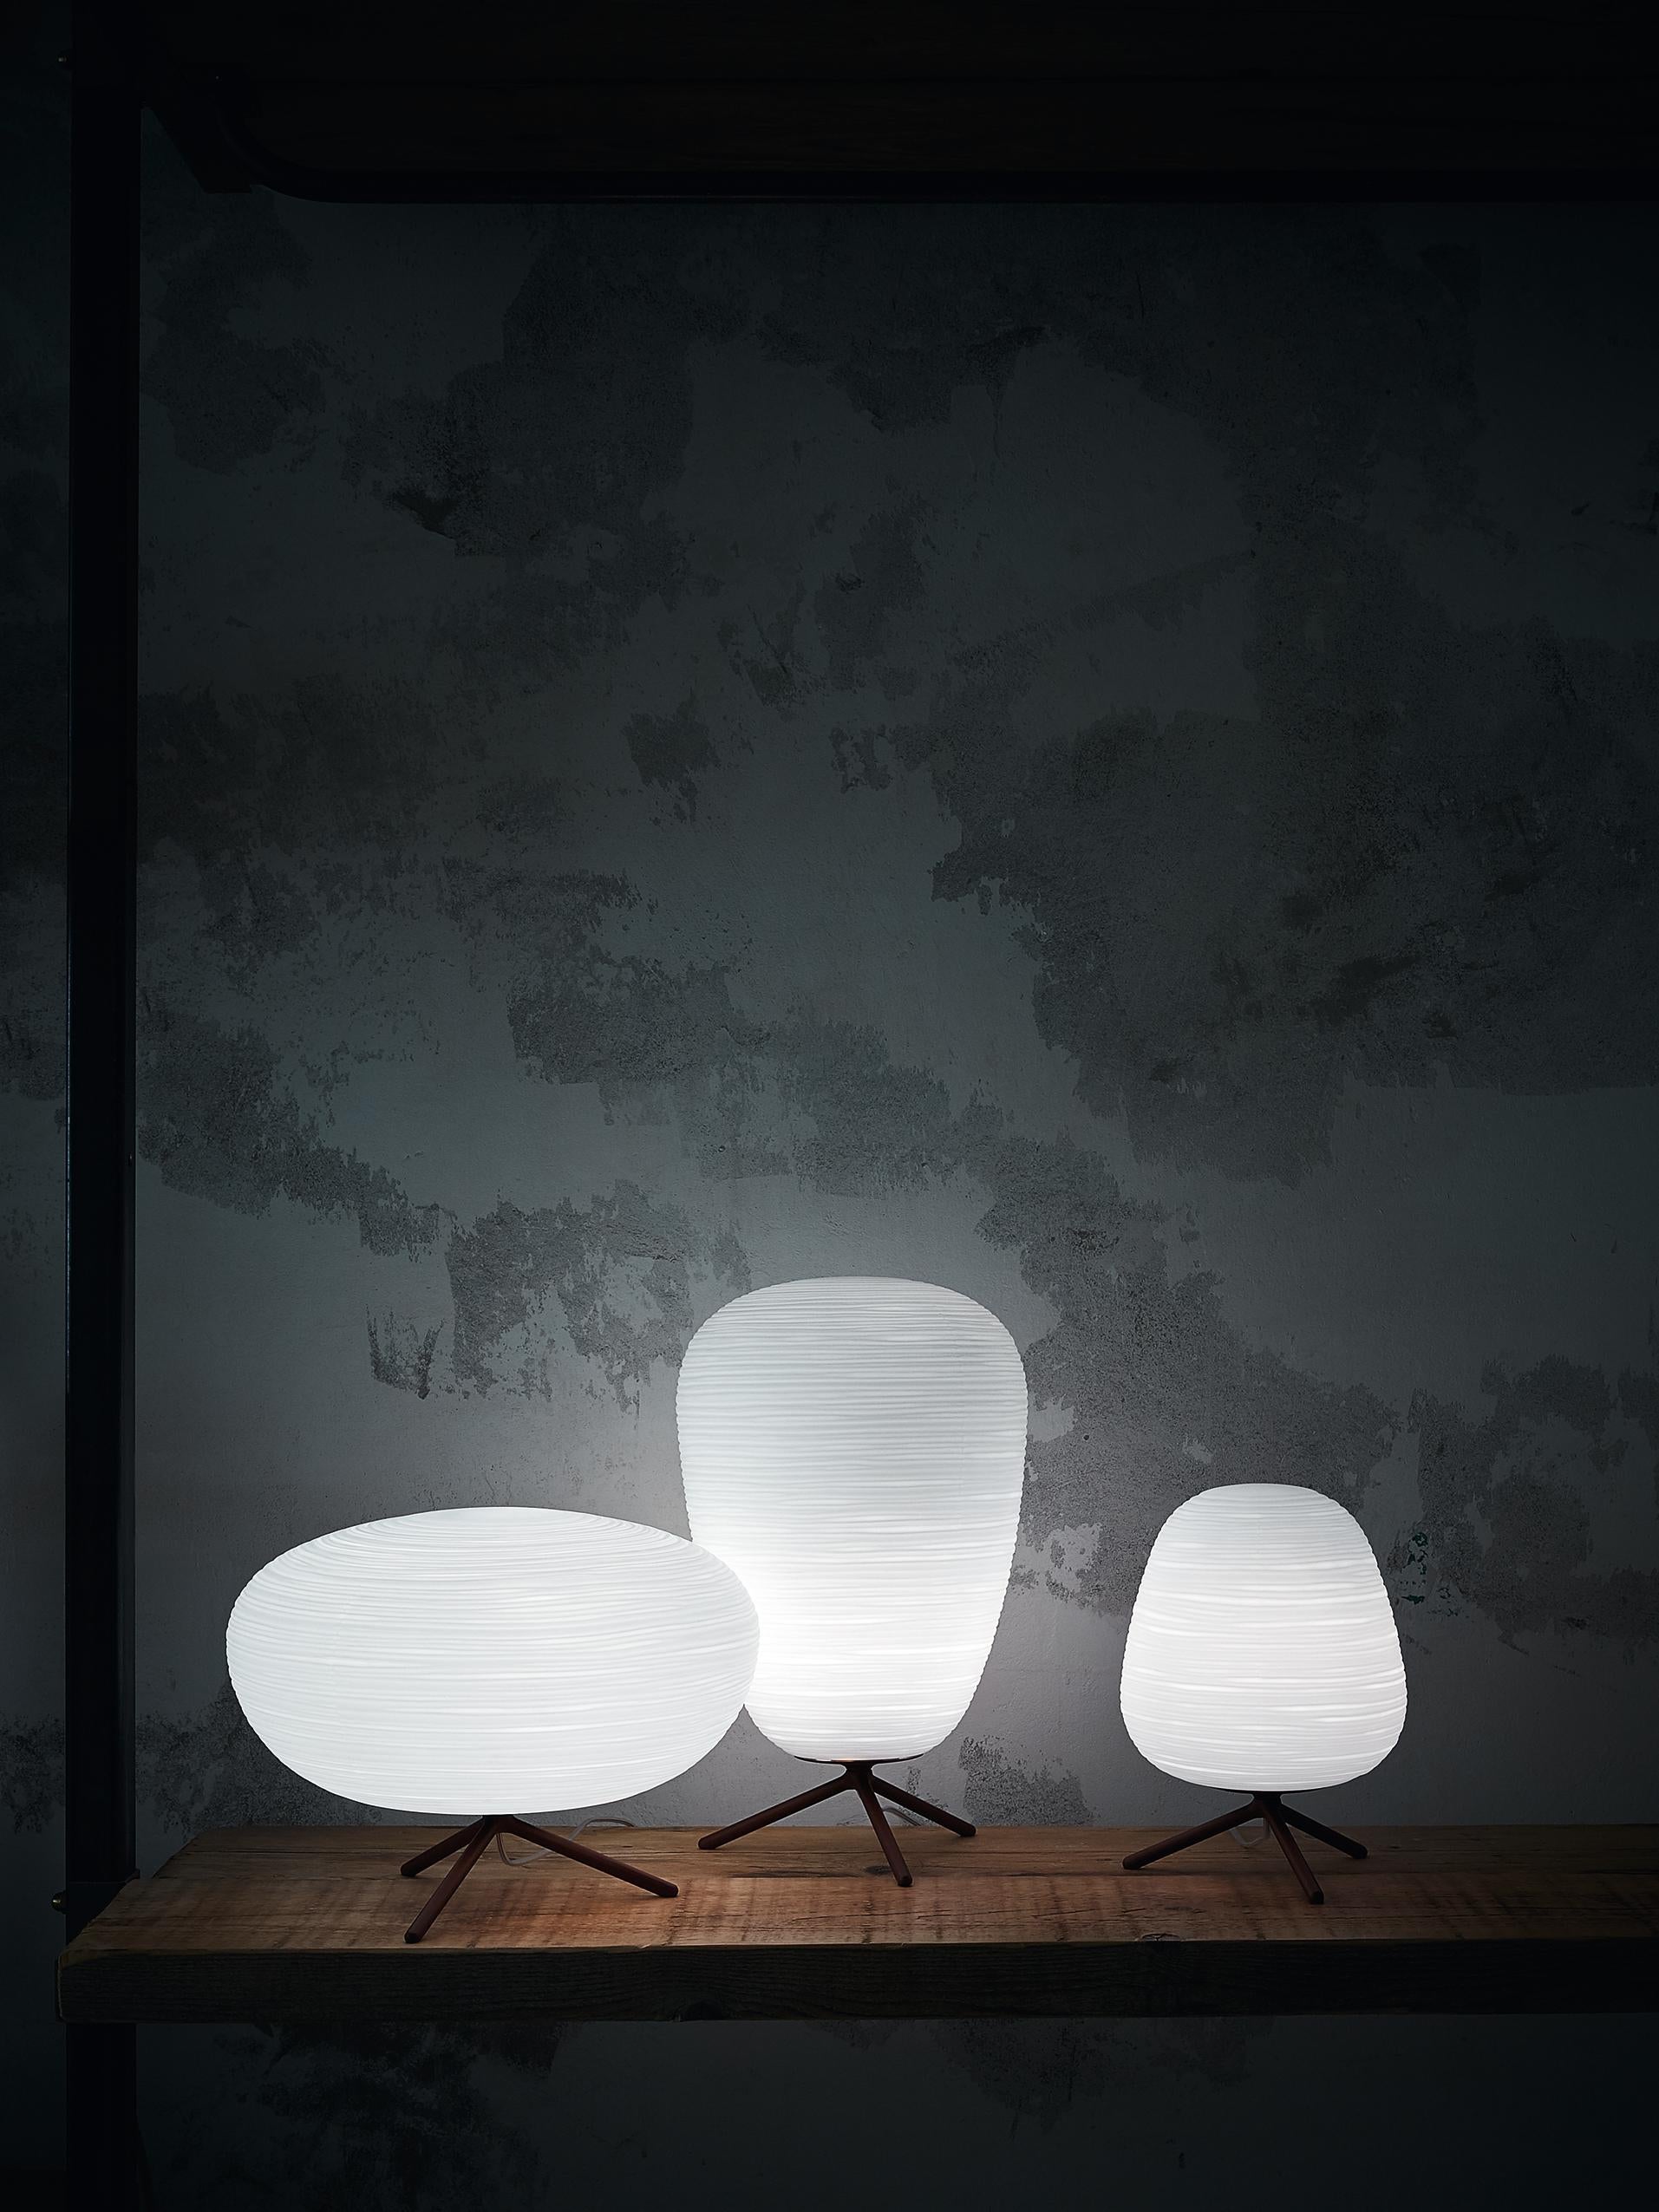 Foscarini Rituals 1 Table Lamp White by Ludovica & Roberto Palomba In New Condition For Sale In Brooklyn, NY